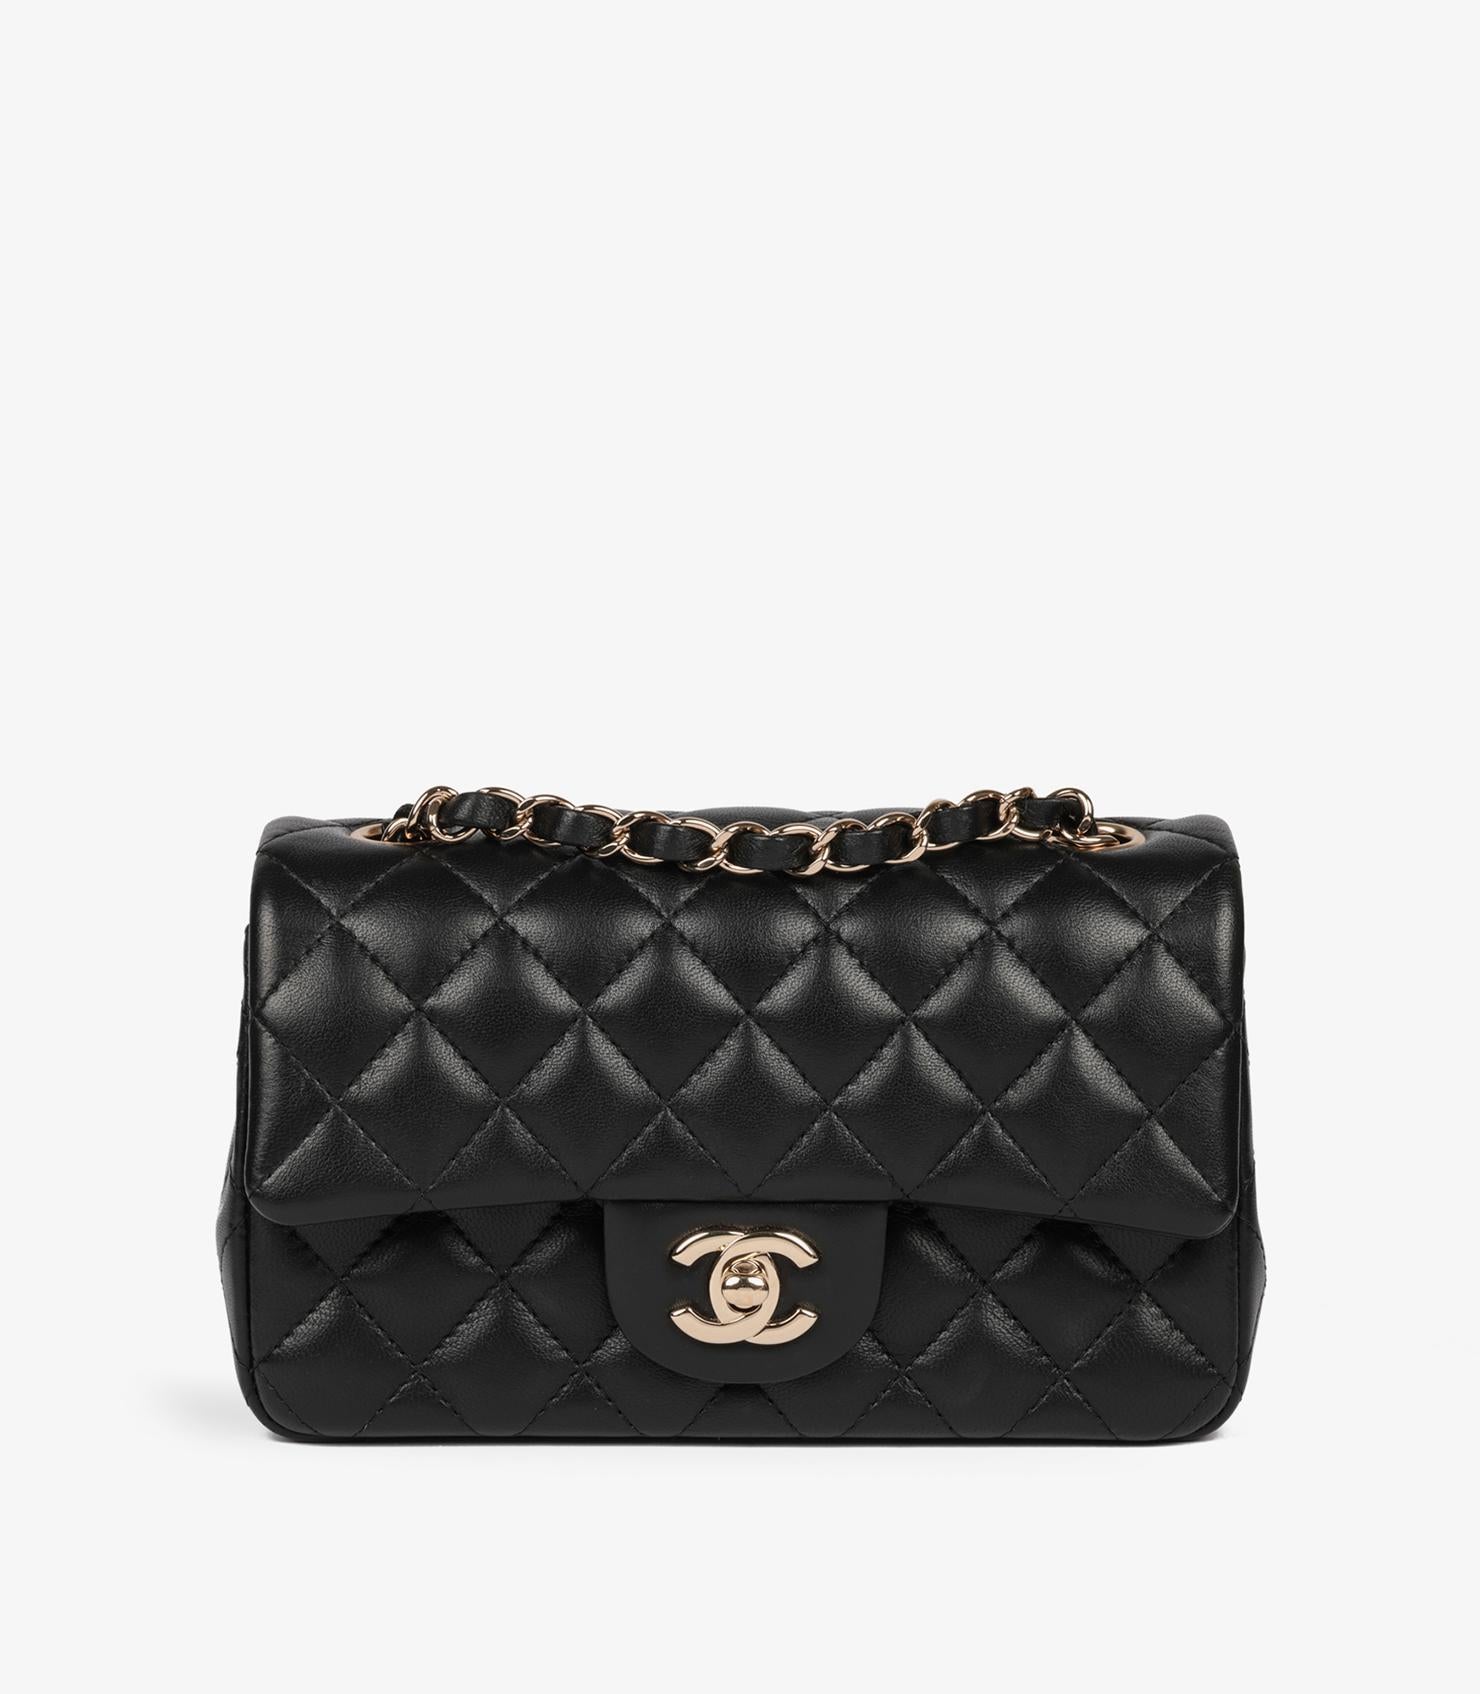 Chanel Black Quilted Lambskin Rectangular Mini Flap Bag

Brand- Chanel
Model- Rectangular Mini Flap Bag
Product Type- Crossbody, Shoulder
Serial Number- E50P8730
Age- Circa 2022
Accompanied By- Chanel Dust Bag, Box, Care Booklet, Care Card,